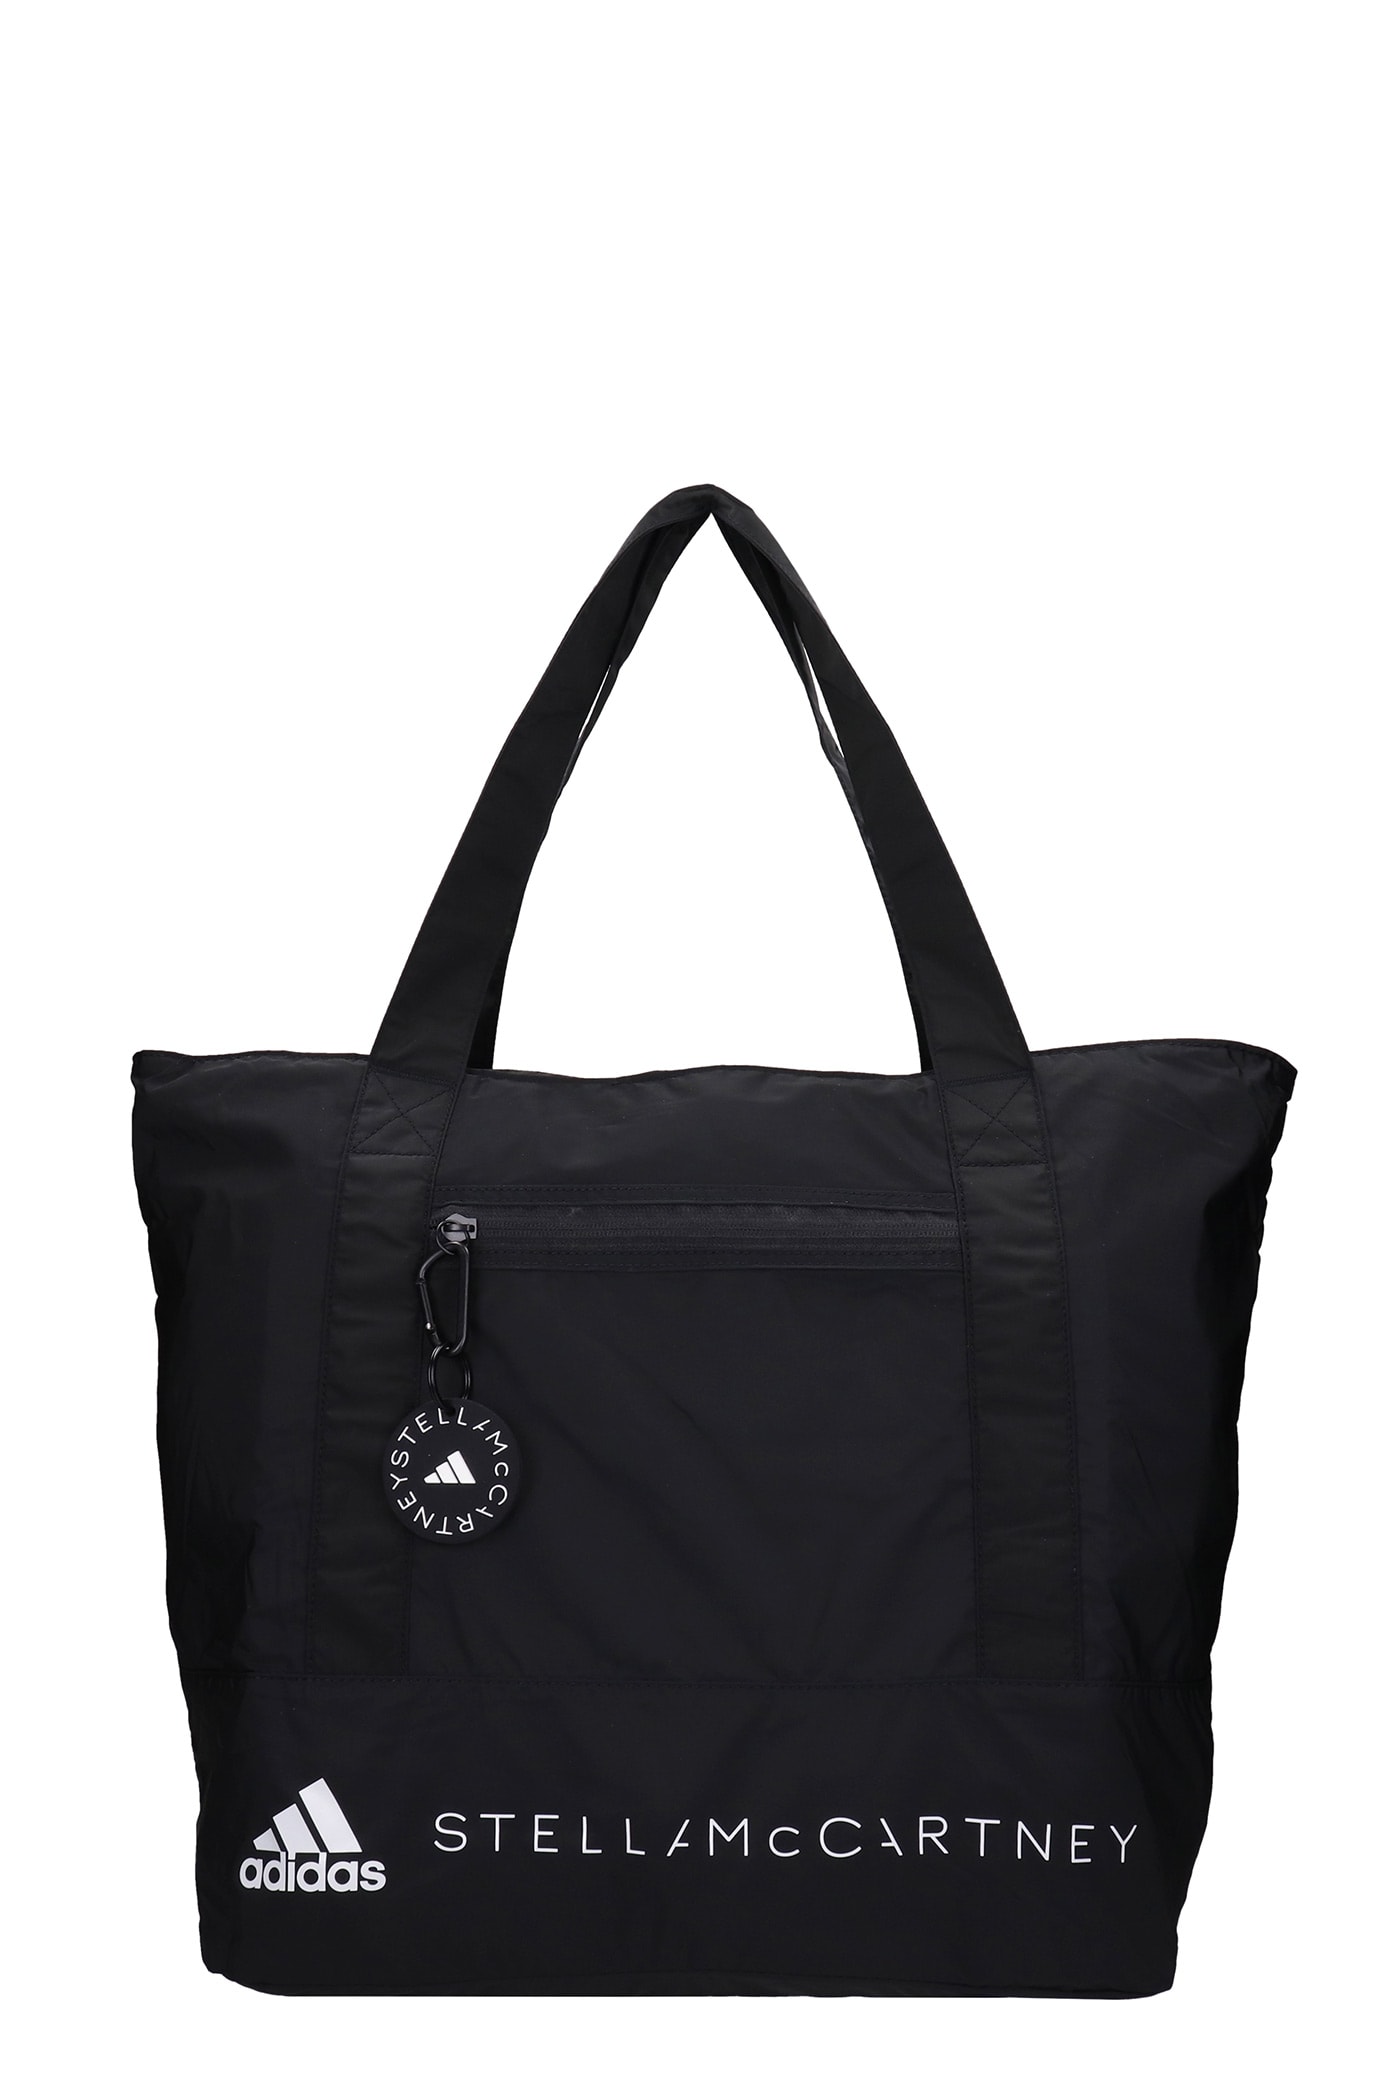 Adidas by Stella McCartney Tote In Black Polyester